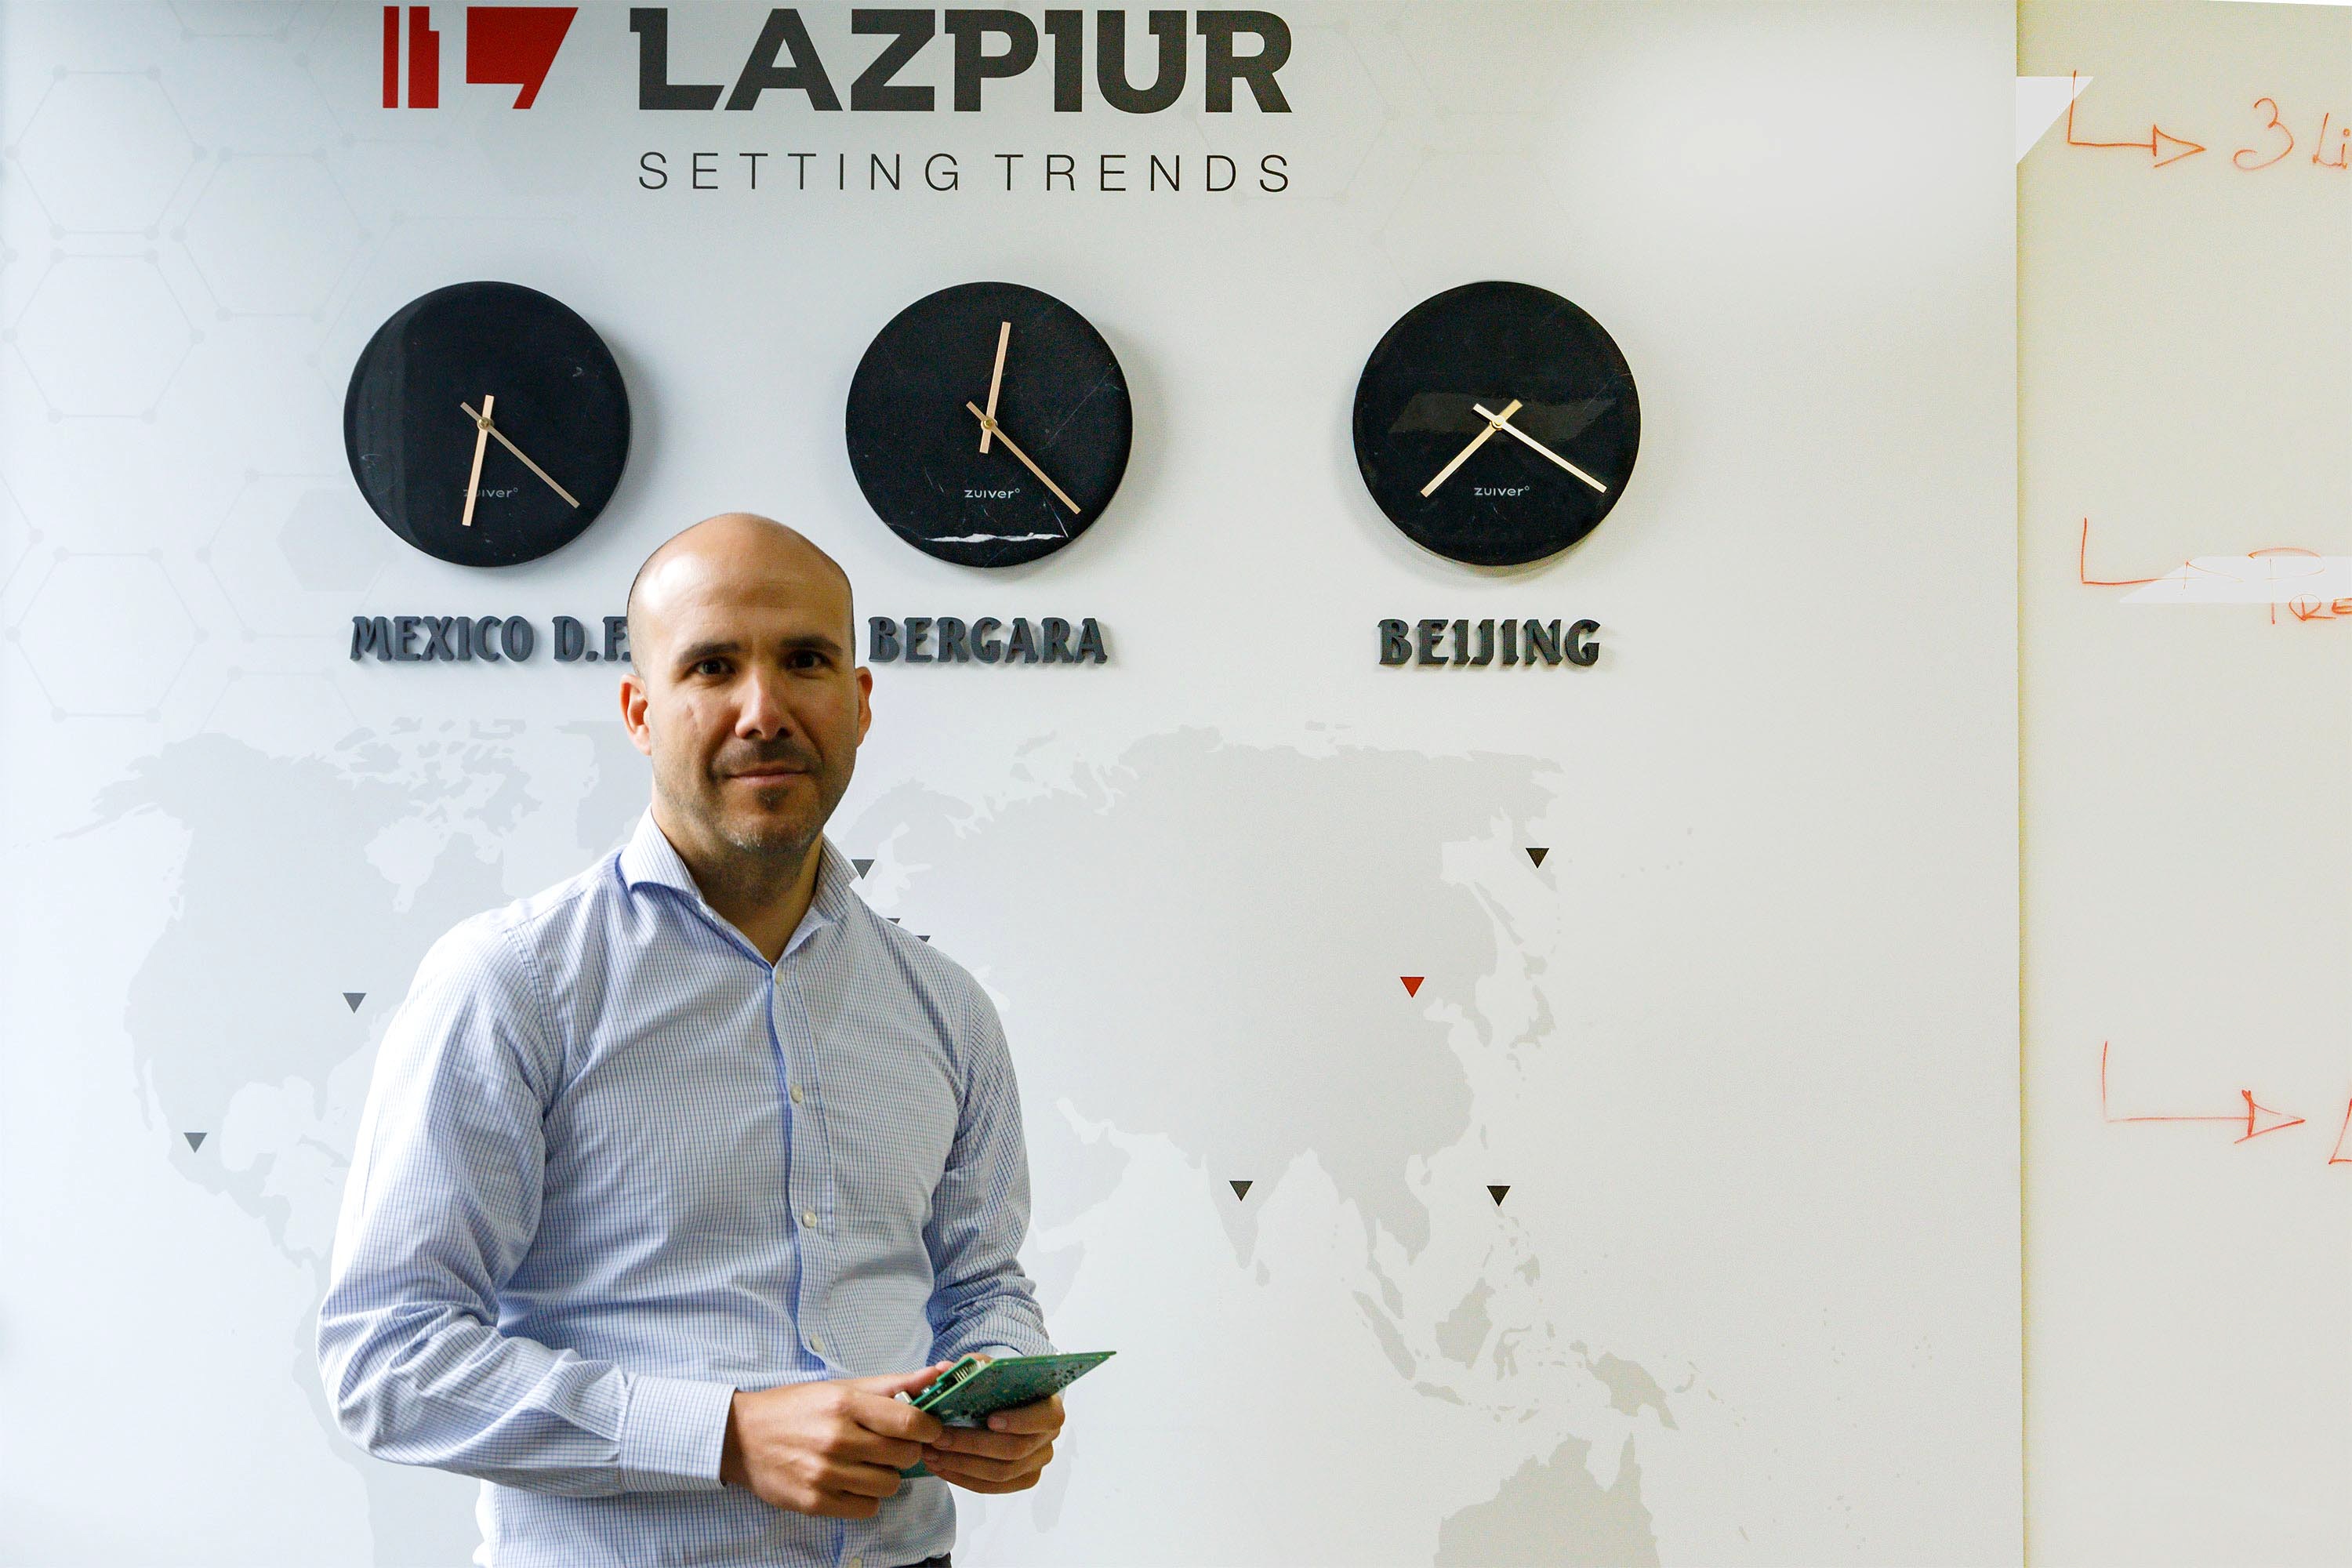 LAZPIUR’s Strategic Plan includes actions to make them a leader in their sector